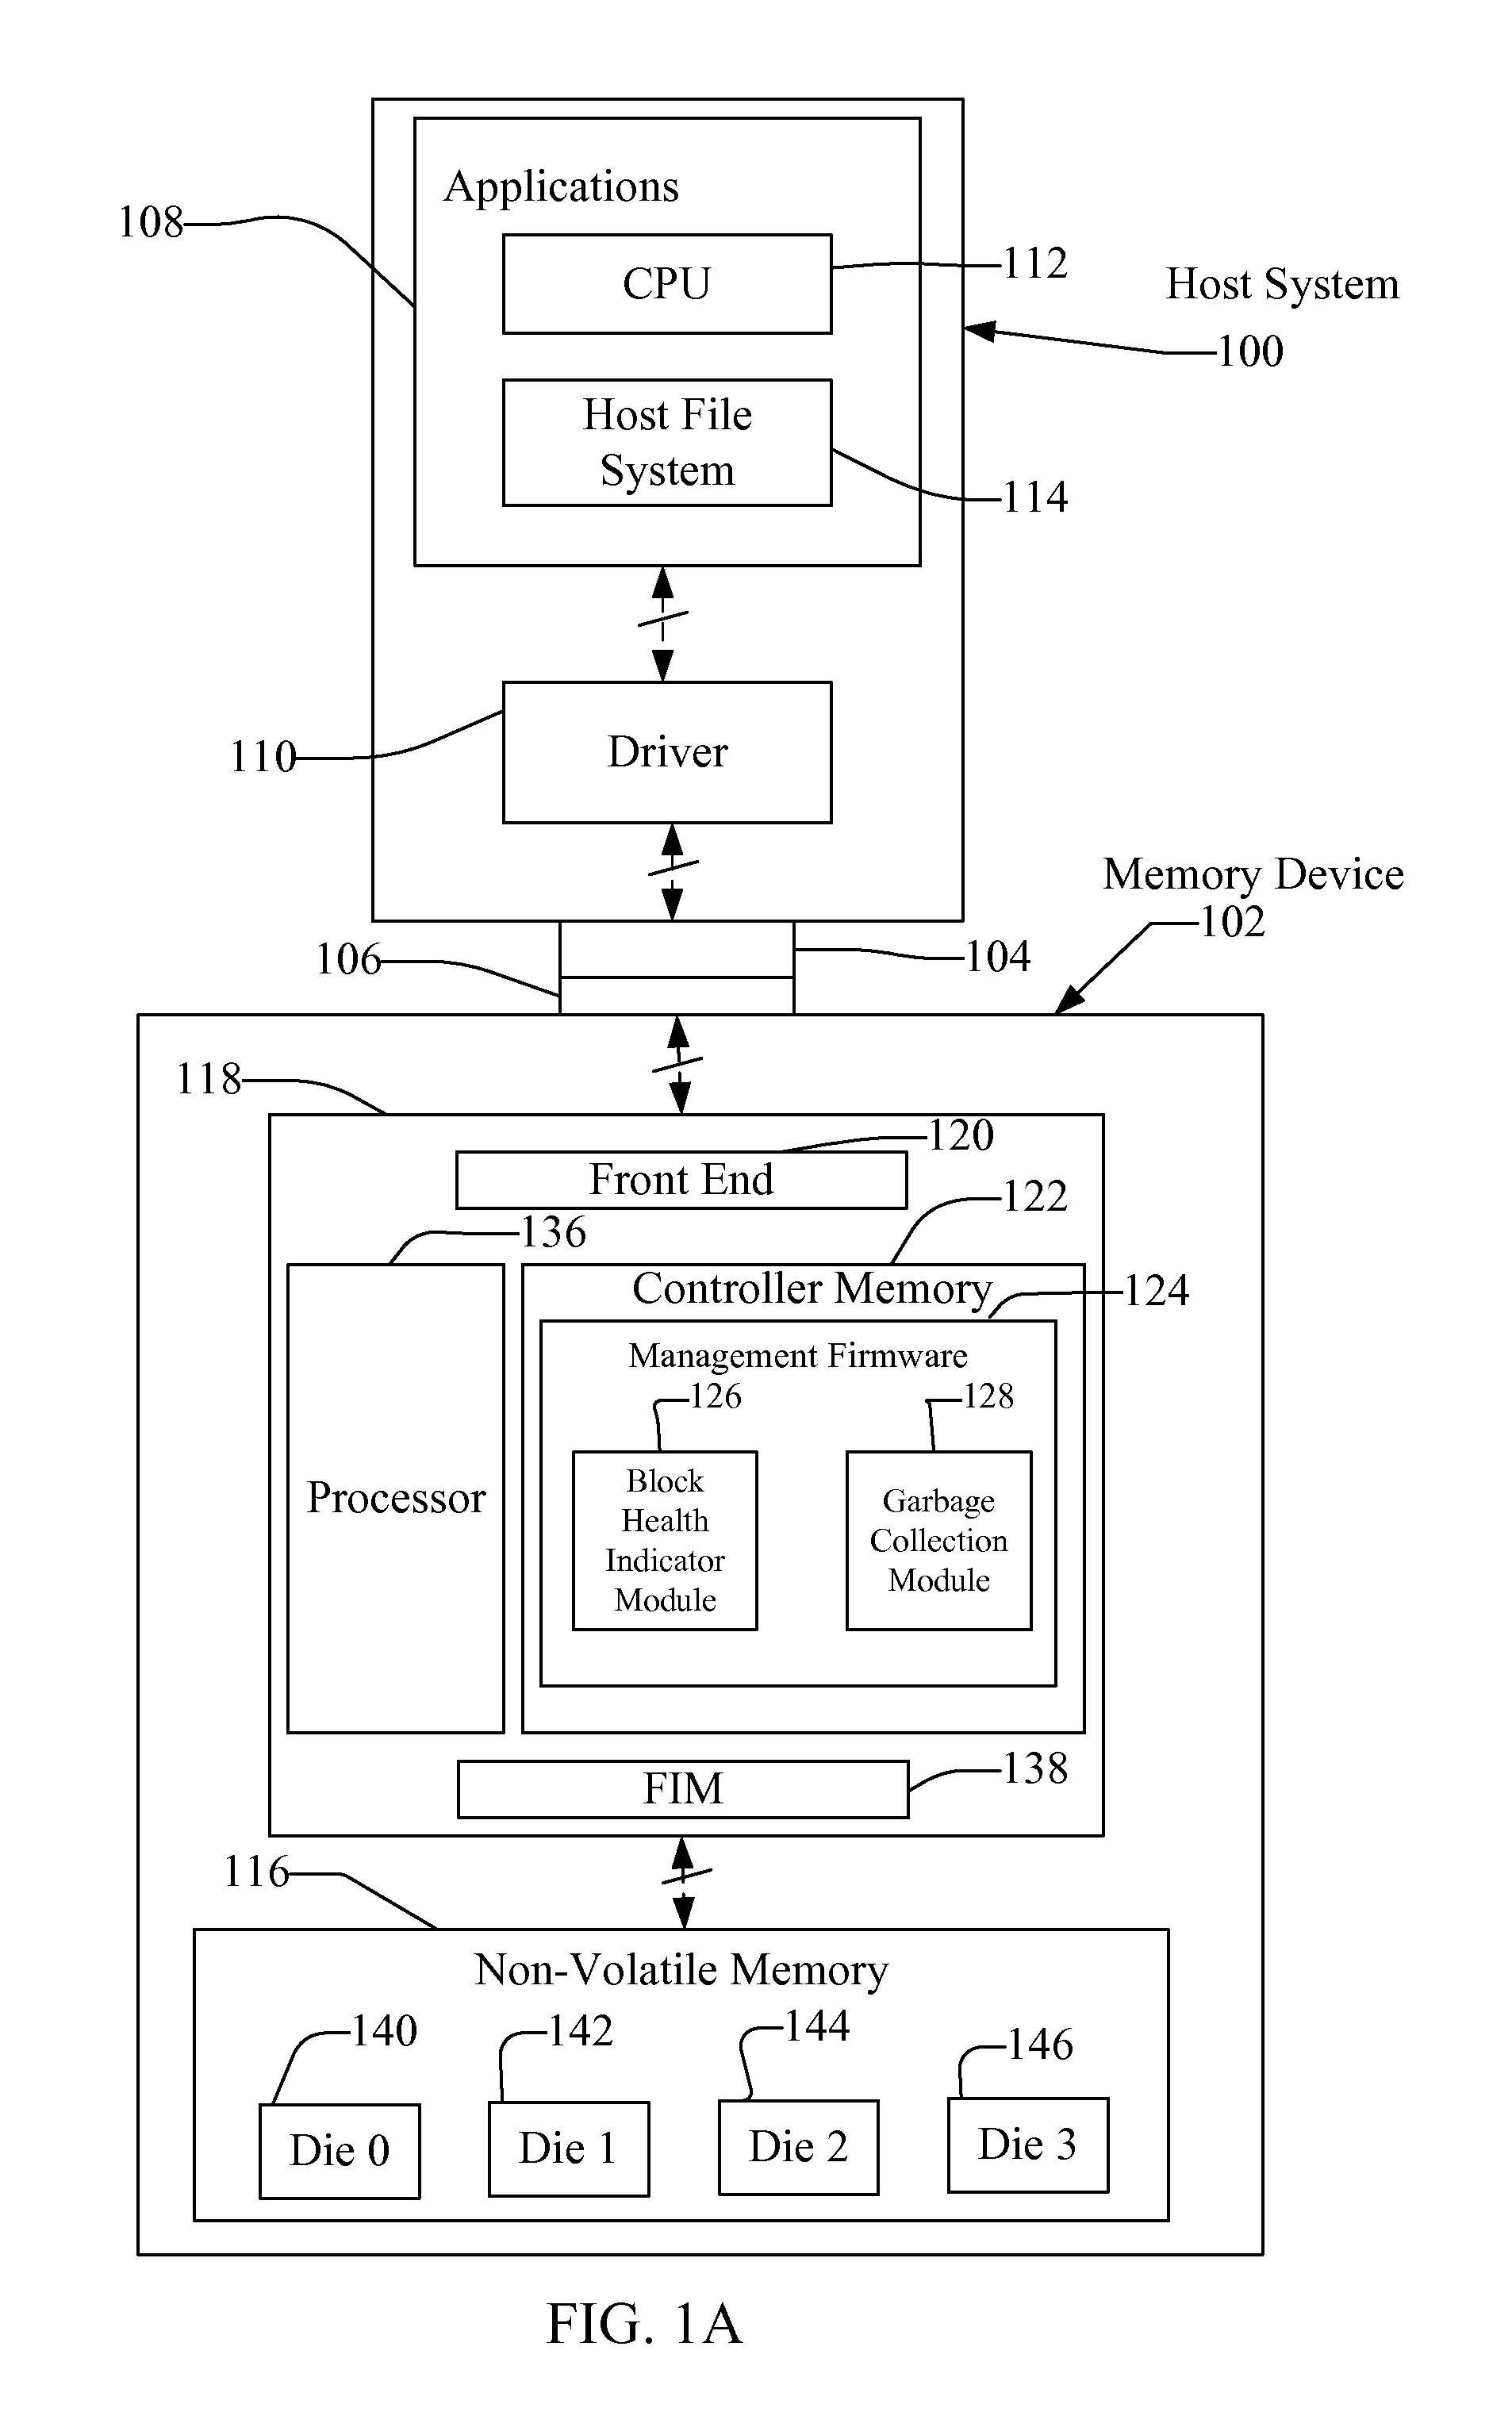 System and Method for Selecting Blocks for Garbage Collection Based on Block Health